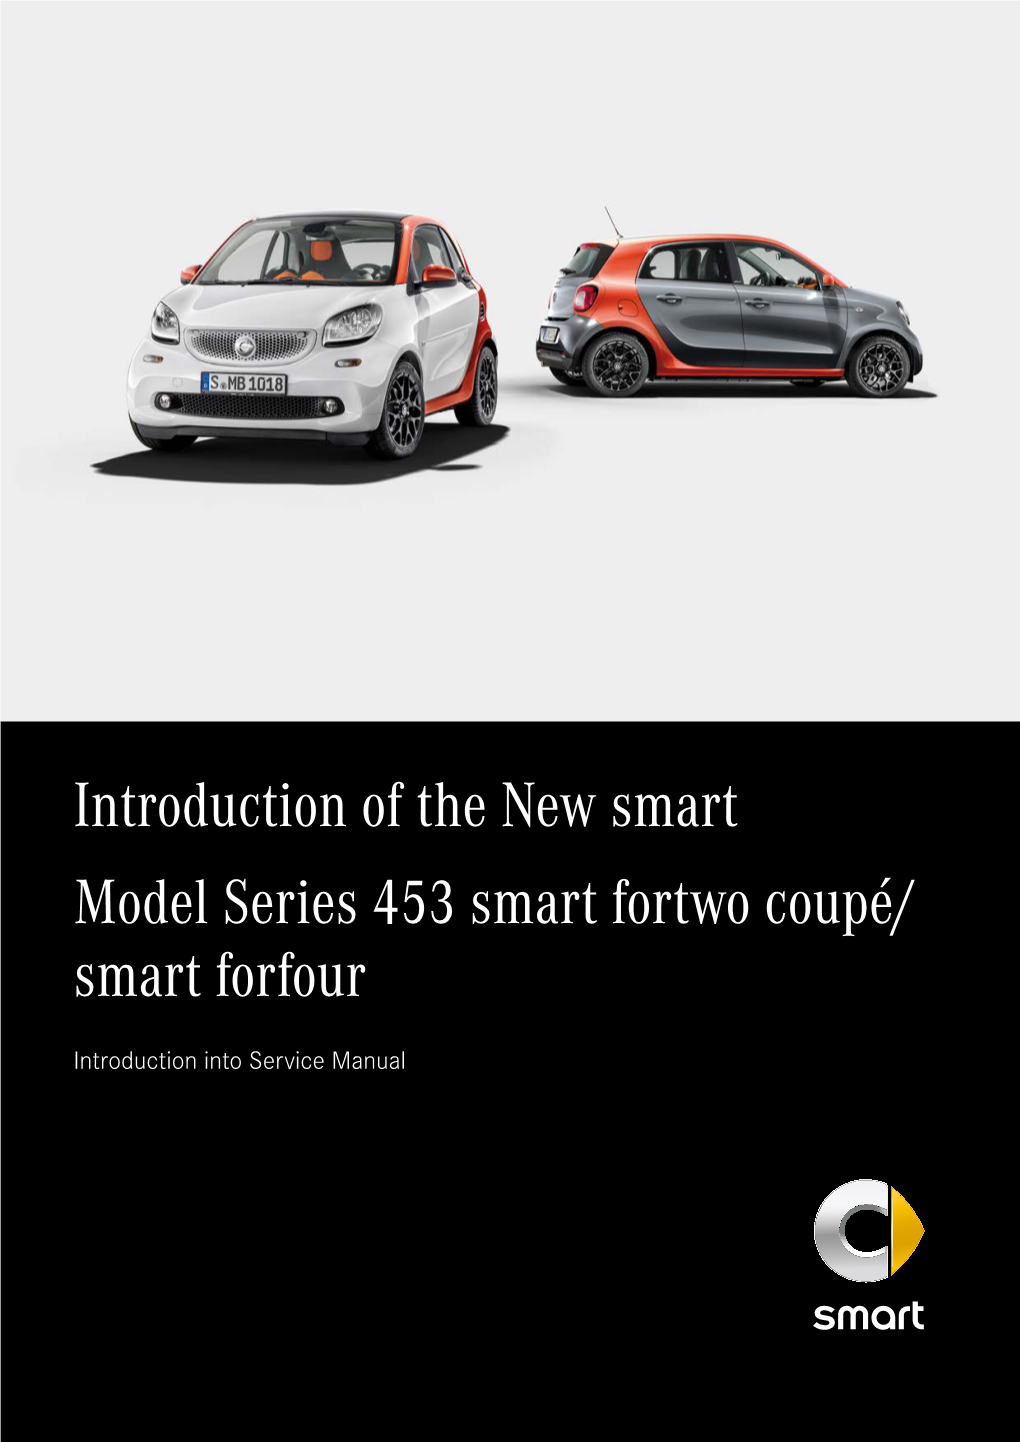 Introduction of the New Smart Model Series 453 Smart Fortwo Coupé/ Smart Forfour